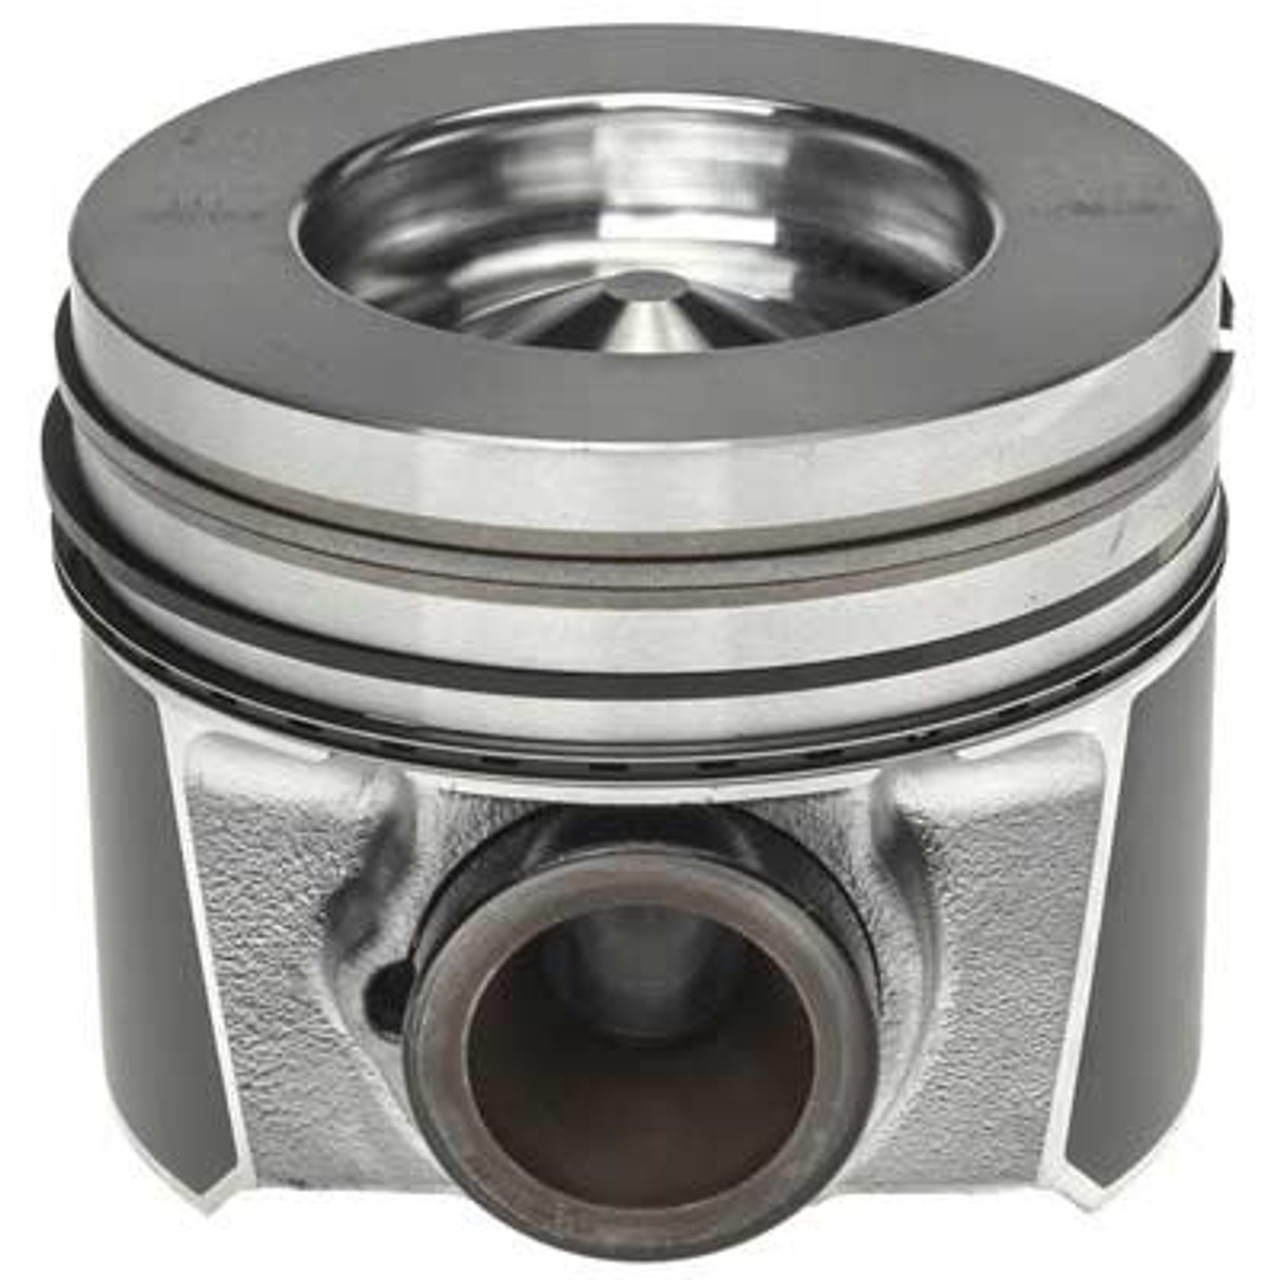 Mahle Piston WIth Rings (.75MM) 2008 to 2010 6.4L Powerstroke (MCI224-3666WR-0.75MM)-Main View